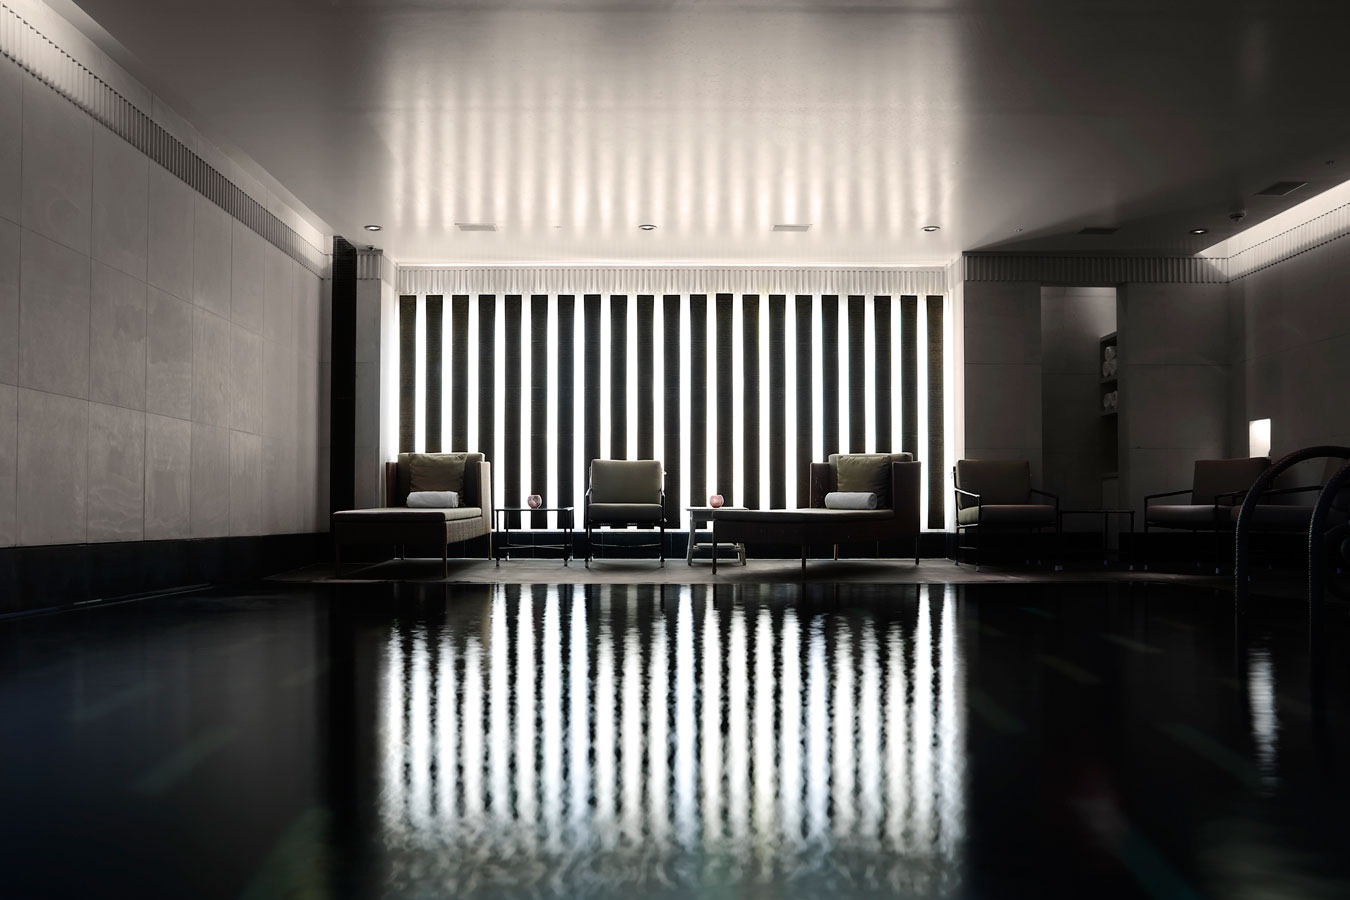 We Review the Connaught Hotel London and Aman's Spa First Urban Spa